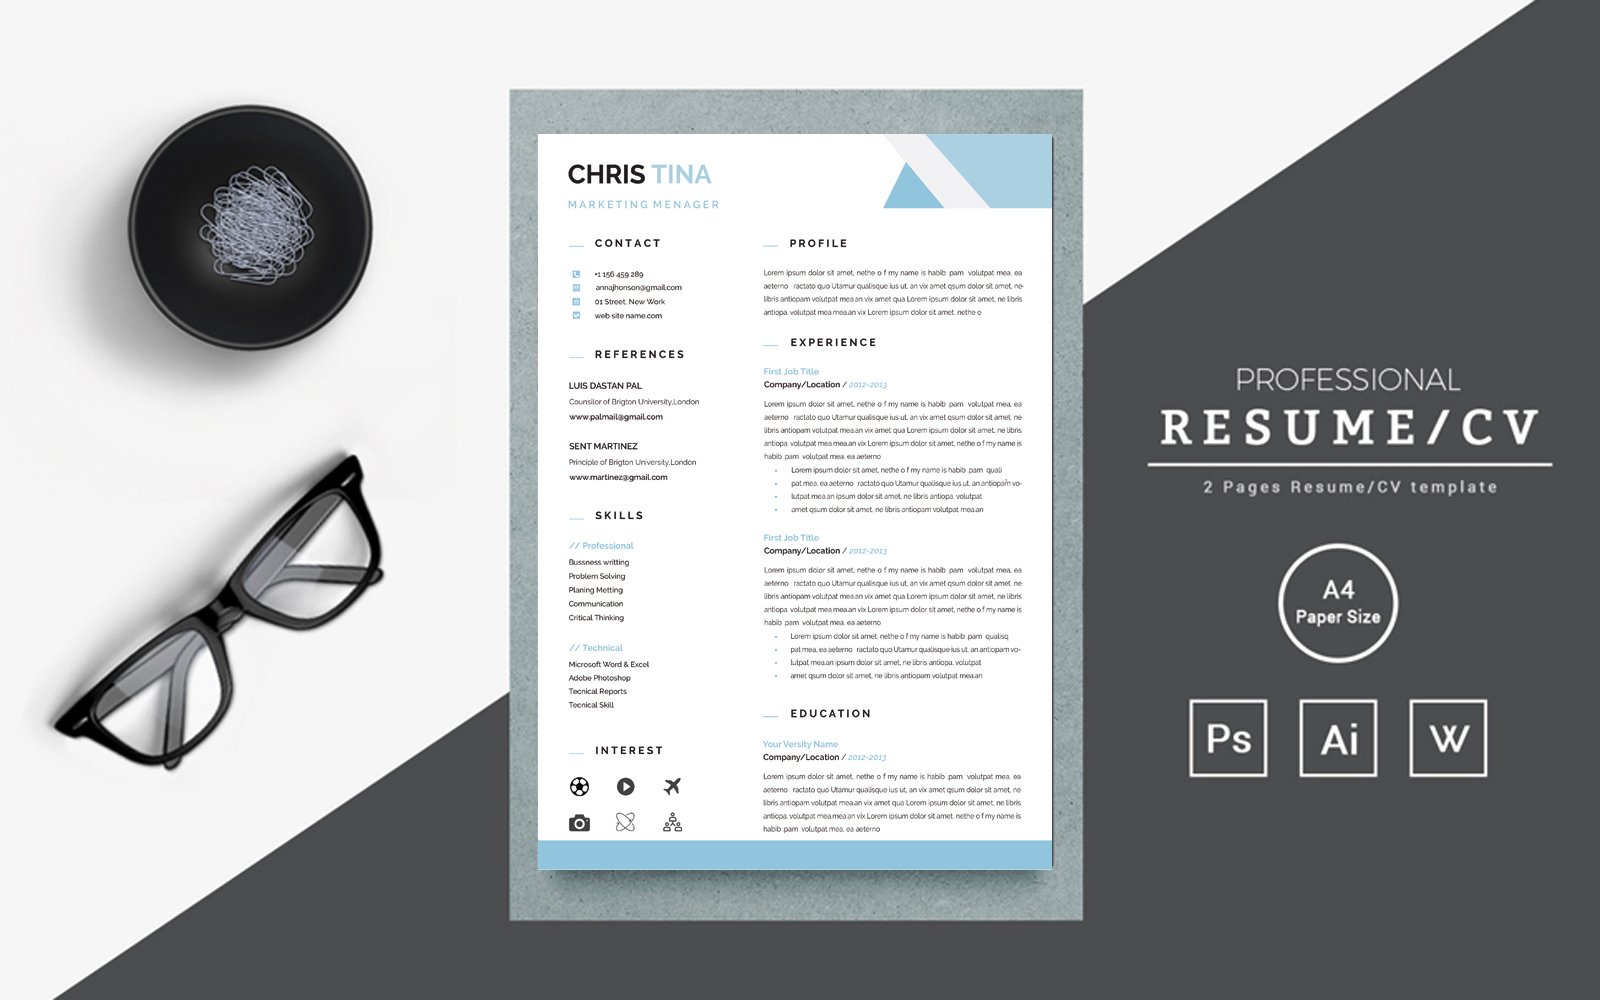 Template #403197 Resume Resume Webdesign Template - Logo template Preview